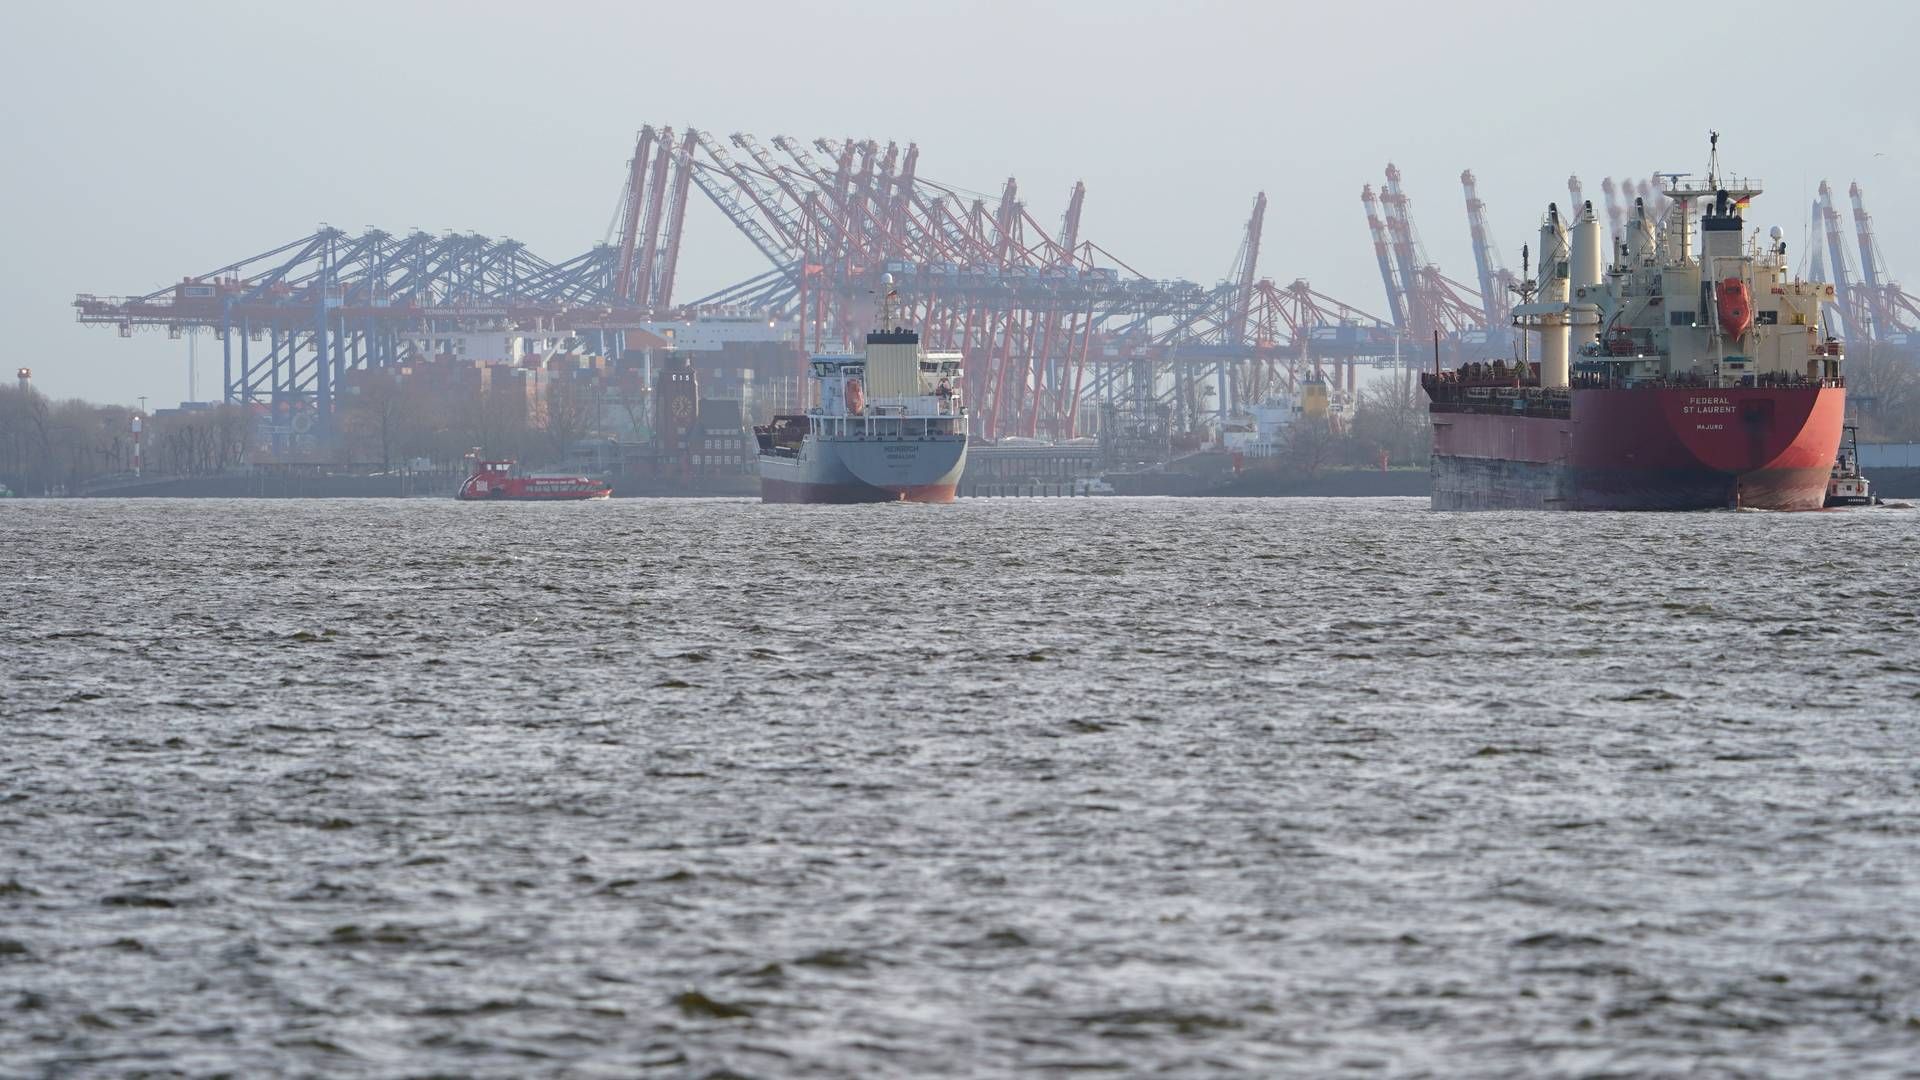 The long-term development of the Port of Hamburg must be much better secured through public investment, according to regional business organizations. | Photo: Marcus Brandt/AP/Ritzau Scanpix